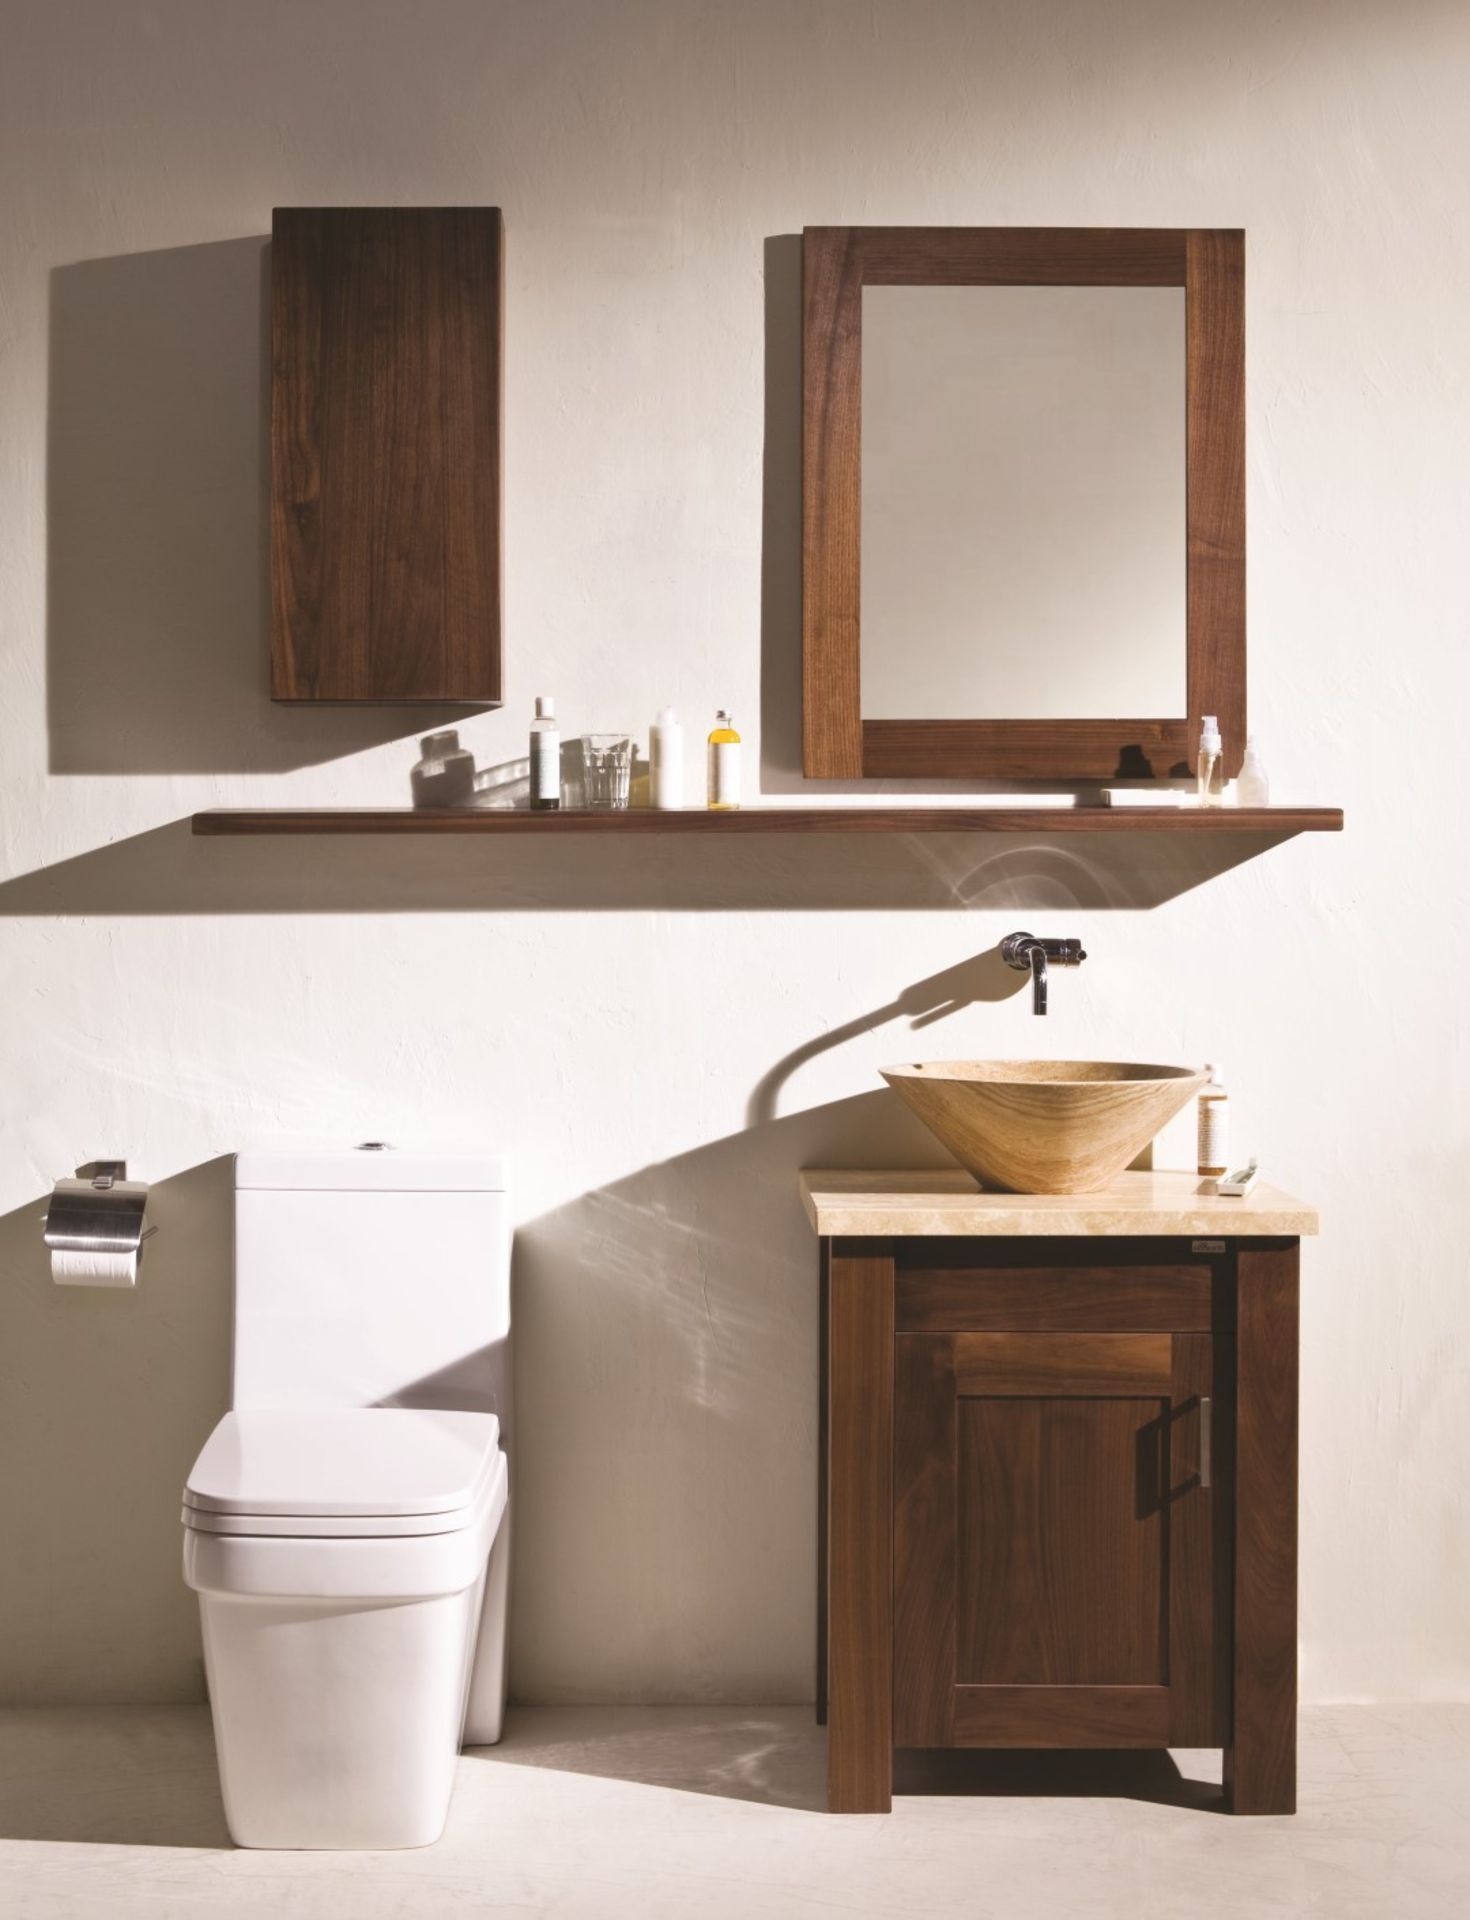 1 x Stonearth Bathroom Storage Shelf With Concealed Brackets - American Solid Walnut - Size: 300mm - Image 9 of 19